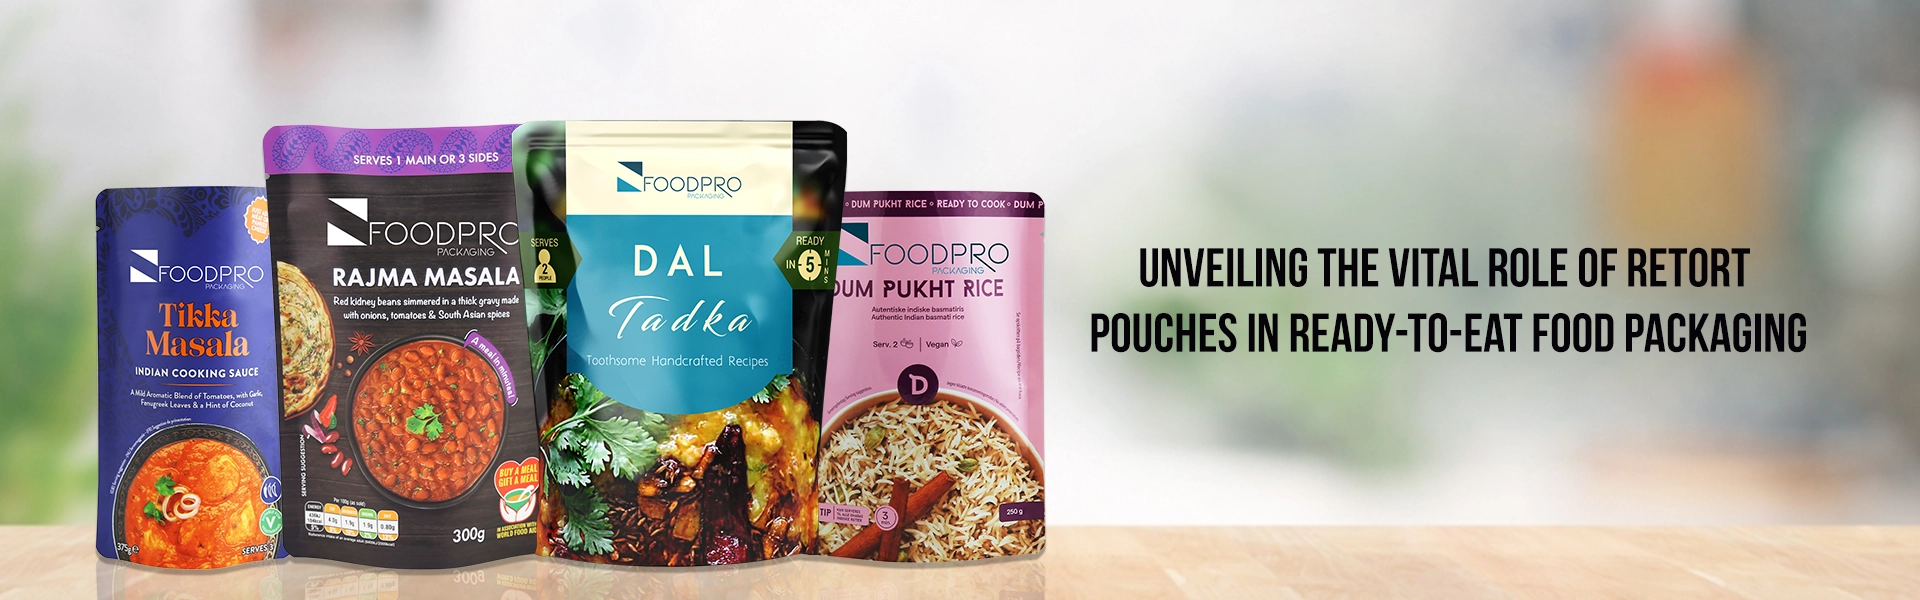 Unveiling the Vital Role of Retort Pouches in Ready-To-Eat Food Packaging